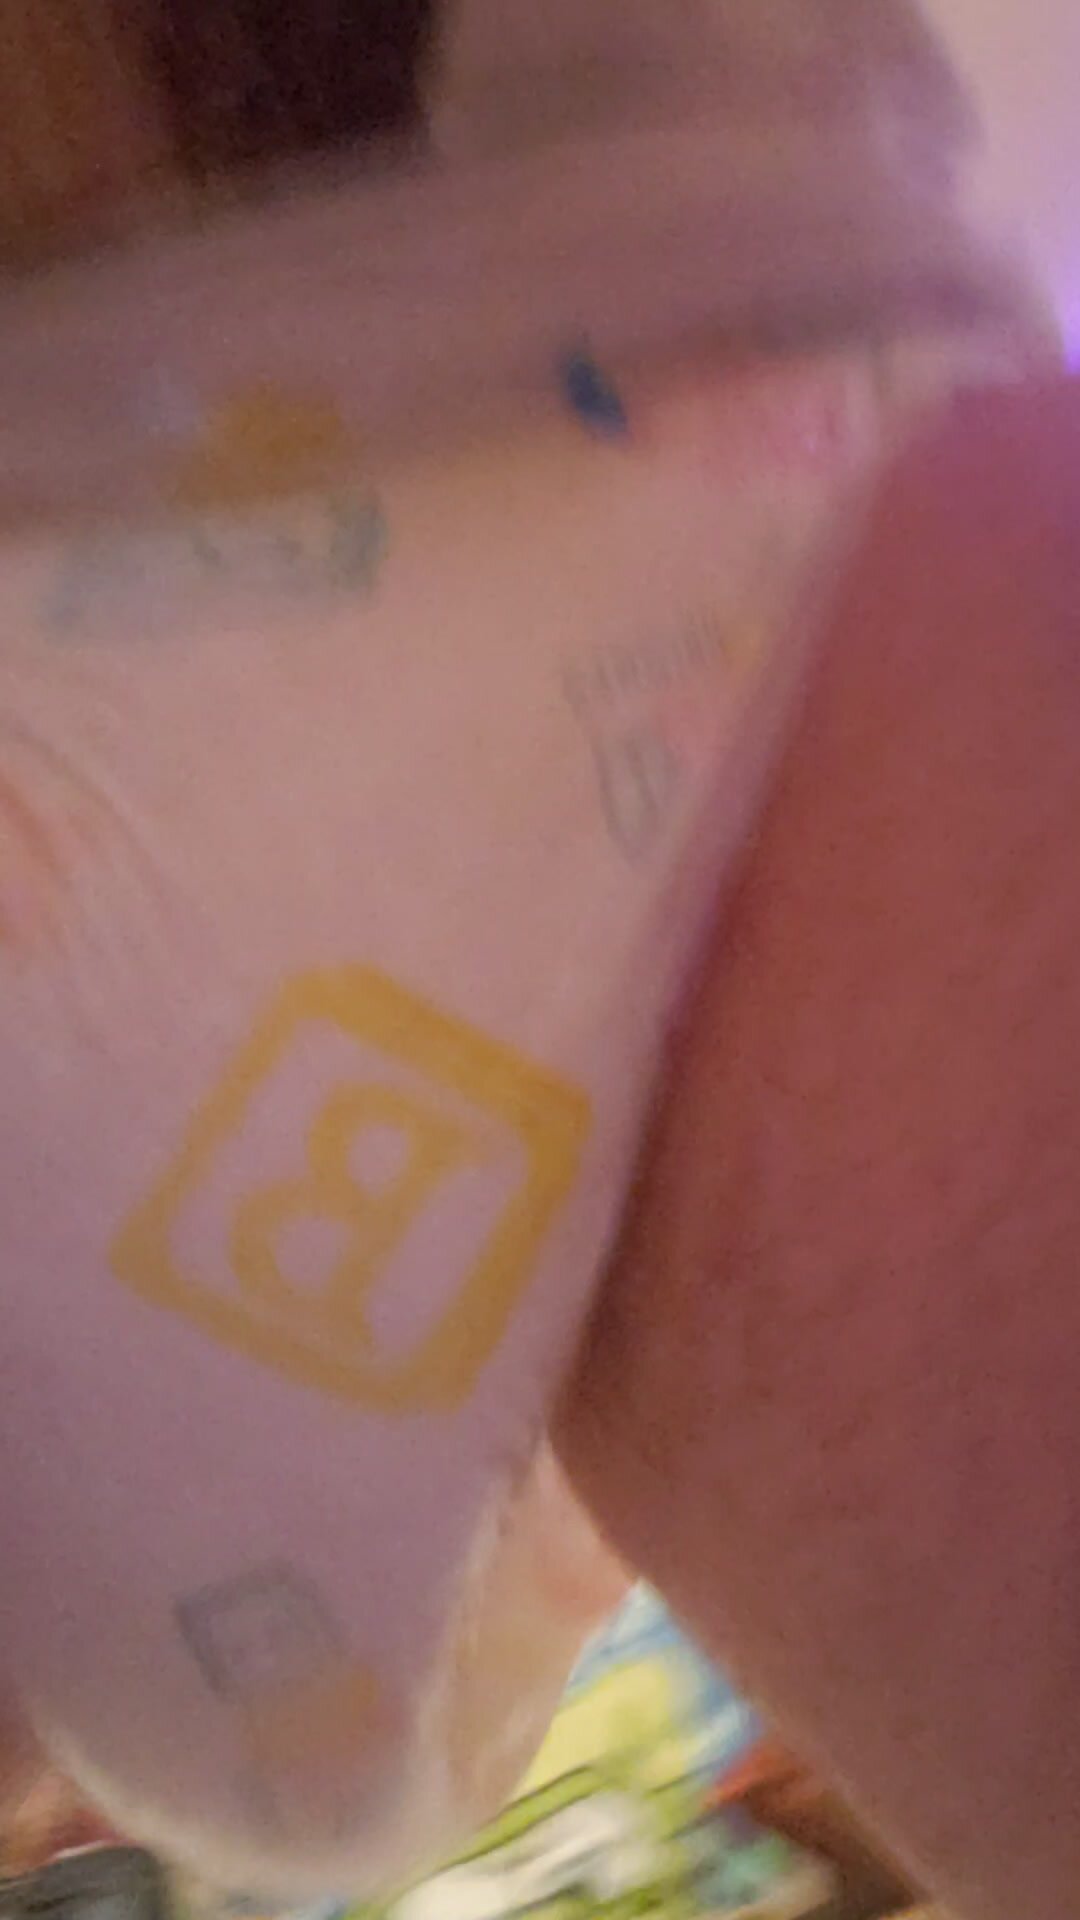 Showing Off My Very Soaked Diaper